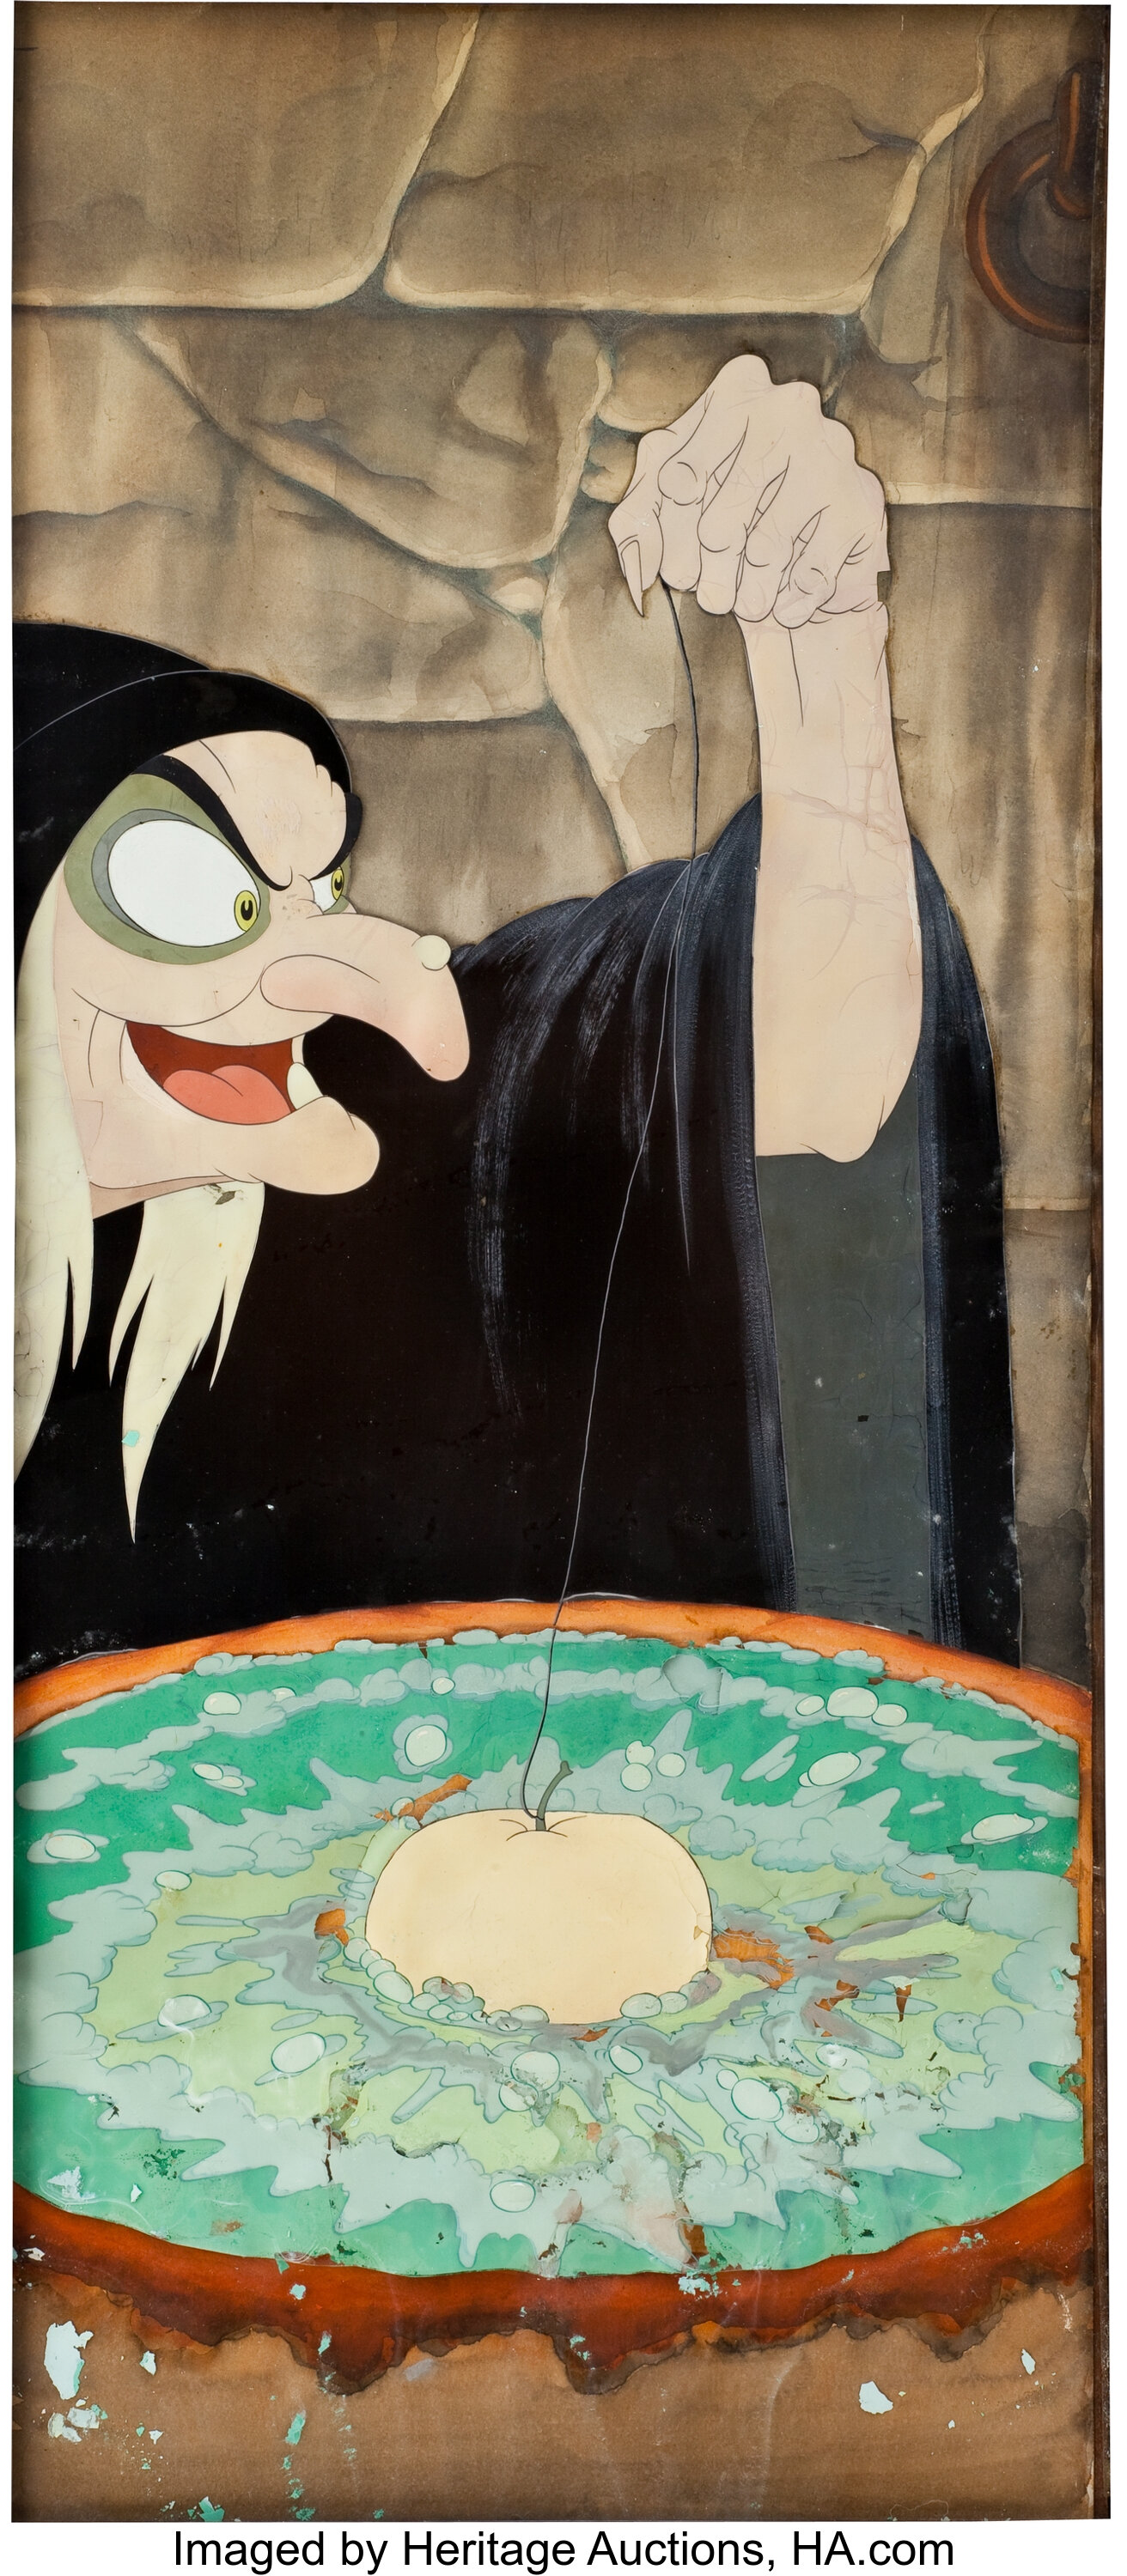 Snow White And The Seven Dwarfs Old Hag Pan Presentation Cel With Lot 92383 Heritage Auctions 